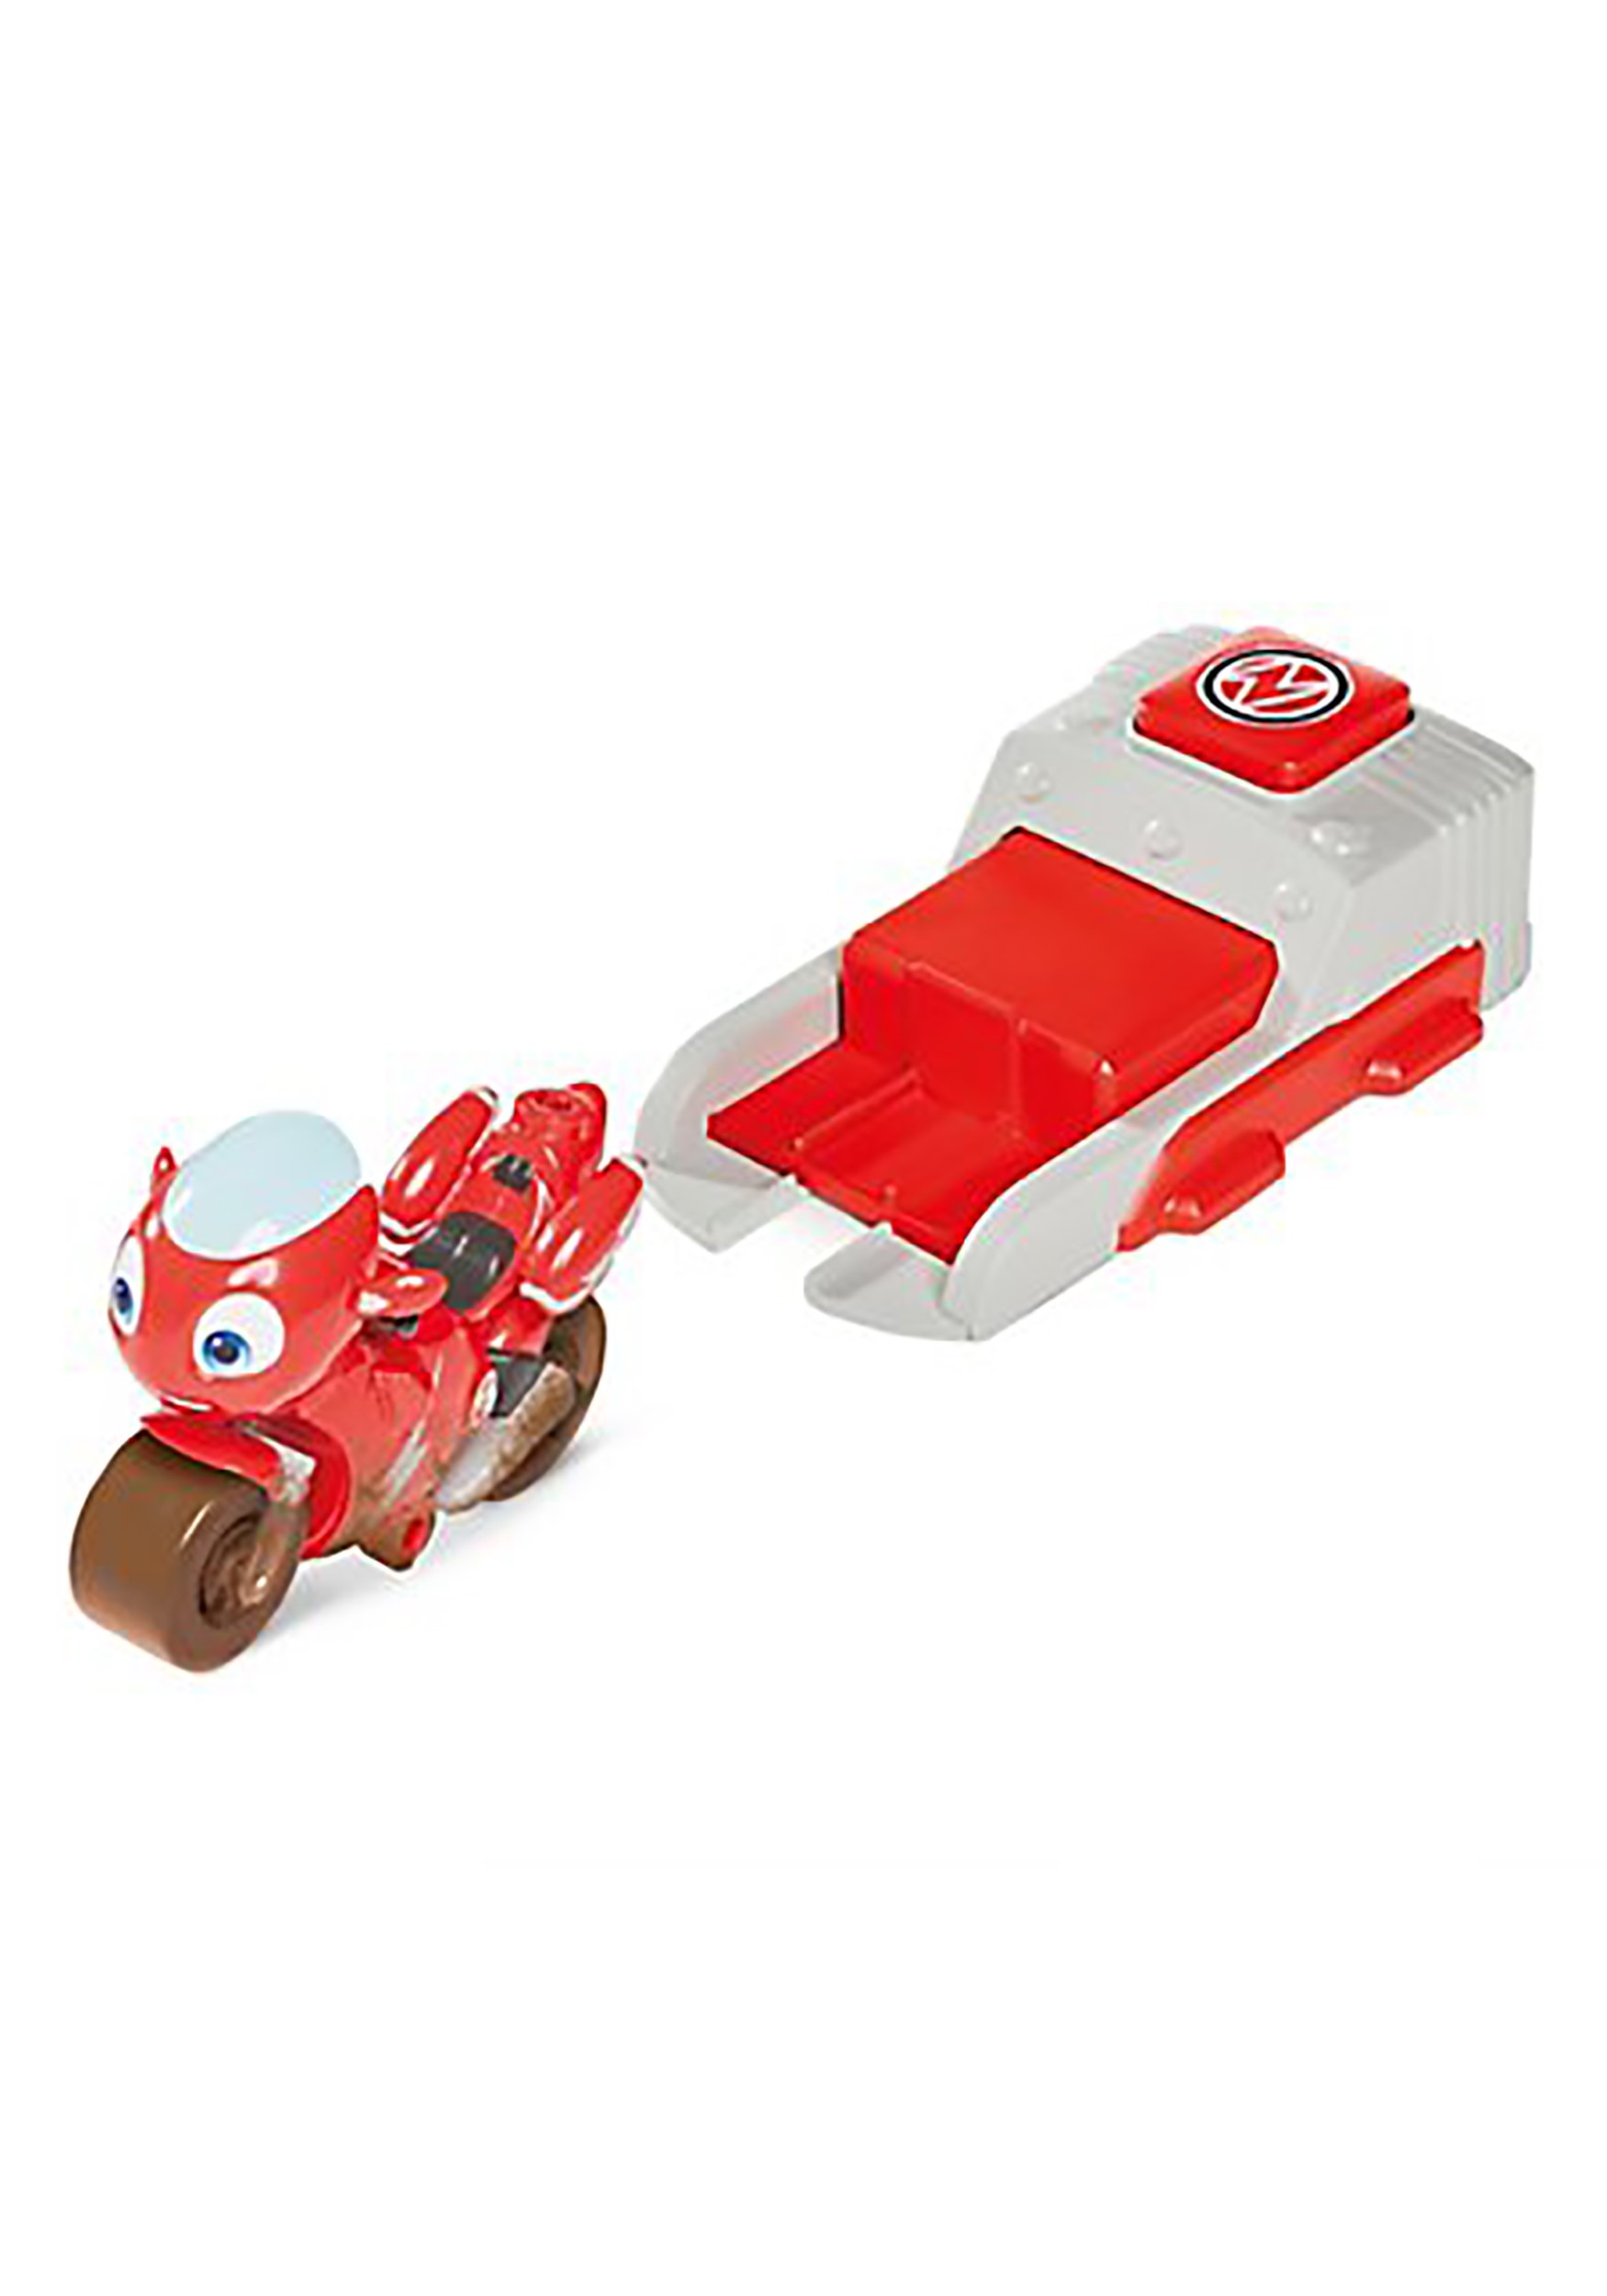 https://images.fun.com/products/66779/1-1/ricky-zoom-feature-ricky-toy-car.jpg